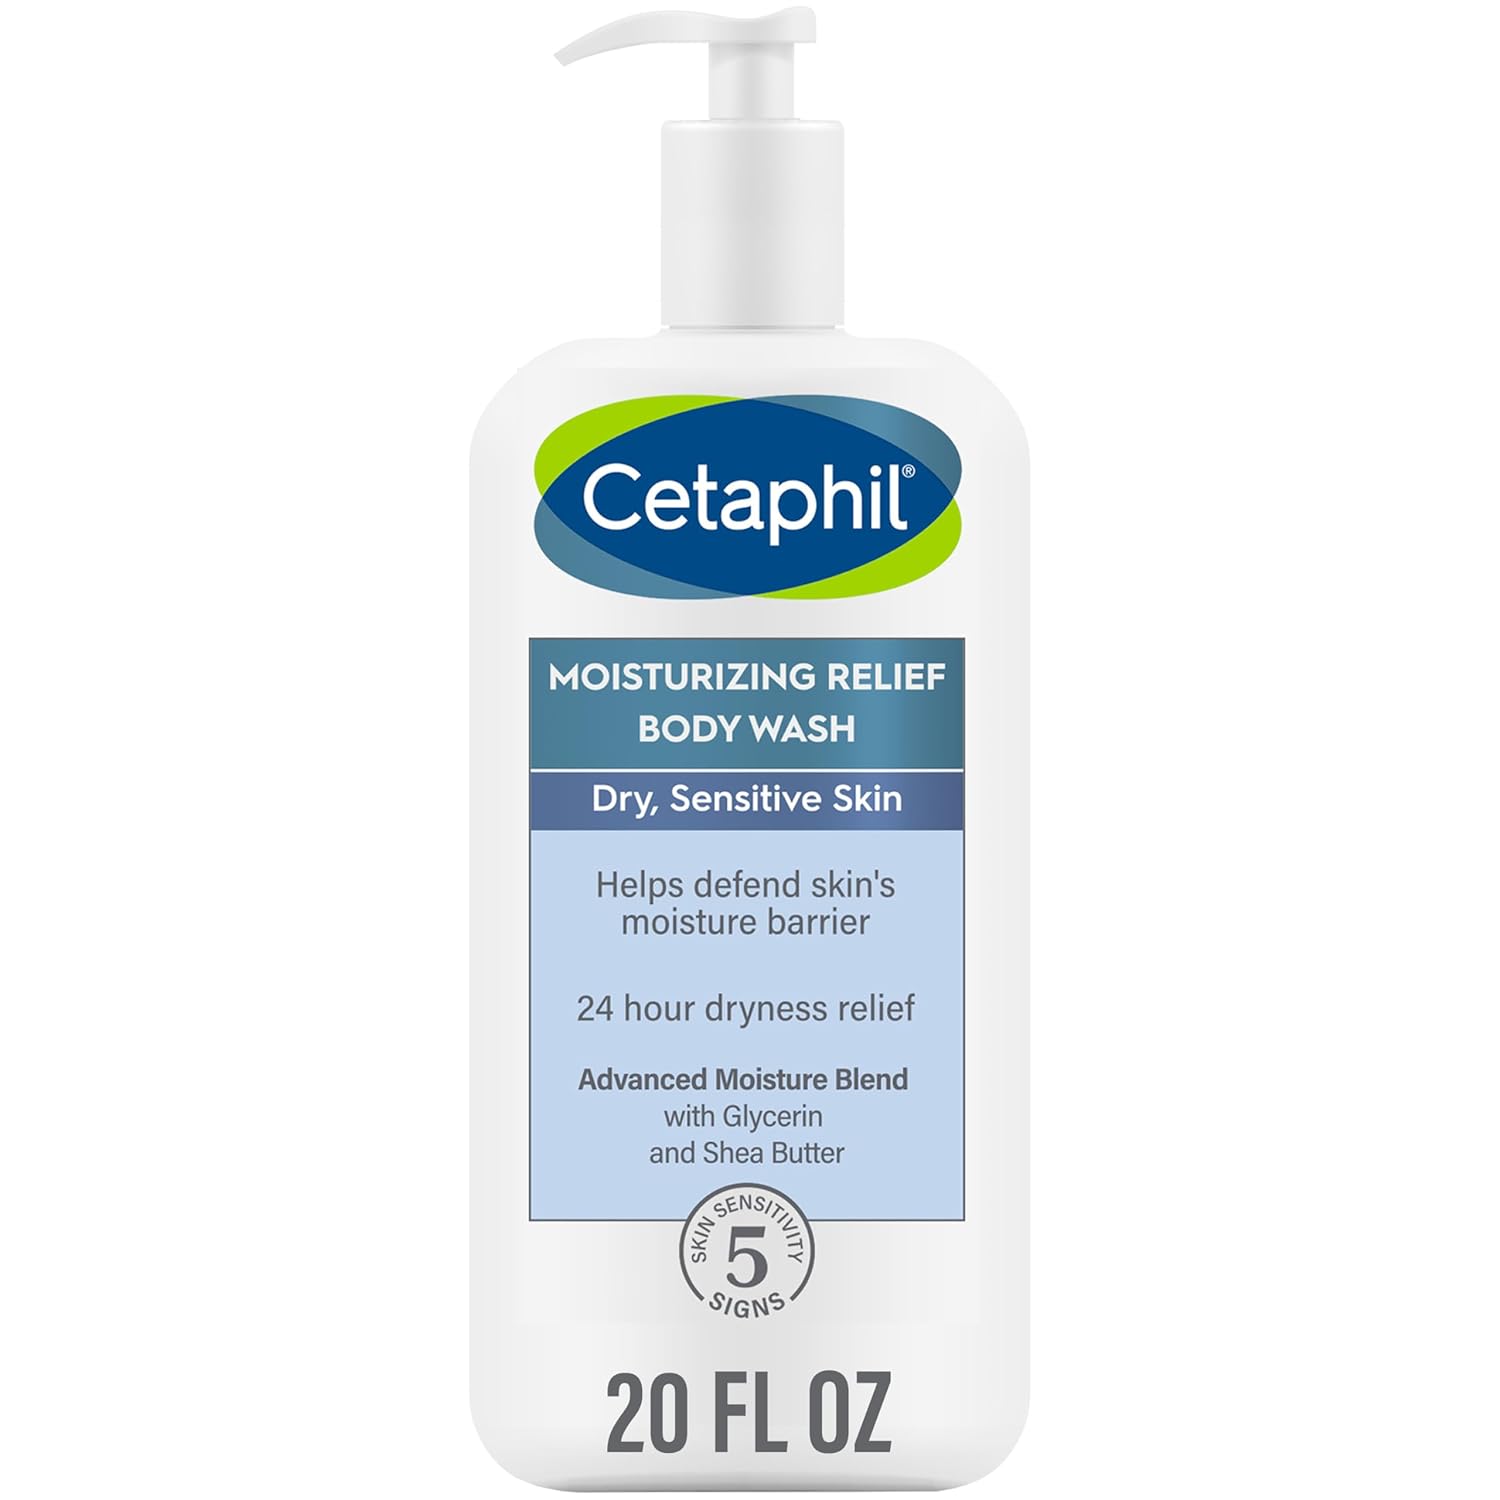 Cetaphil Body Wash, Moisturizing Relief Body Wash for Sensitive Skin, Mother's Day Gifts, Creamy Rich Formula Gently Cleanses, Gives 24Hr Relief to Dry Skin, Hypoallergenic, Fragrance Free, 20oz